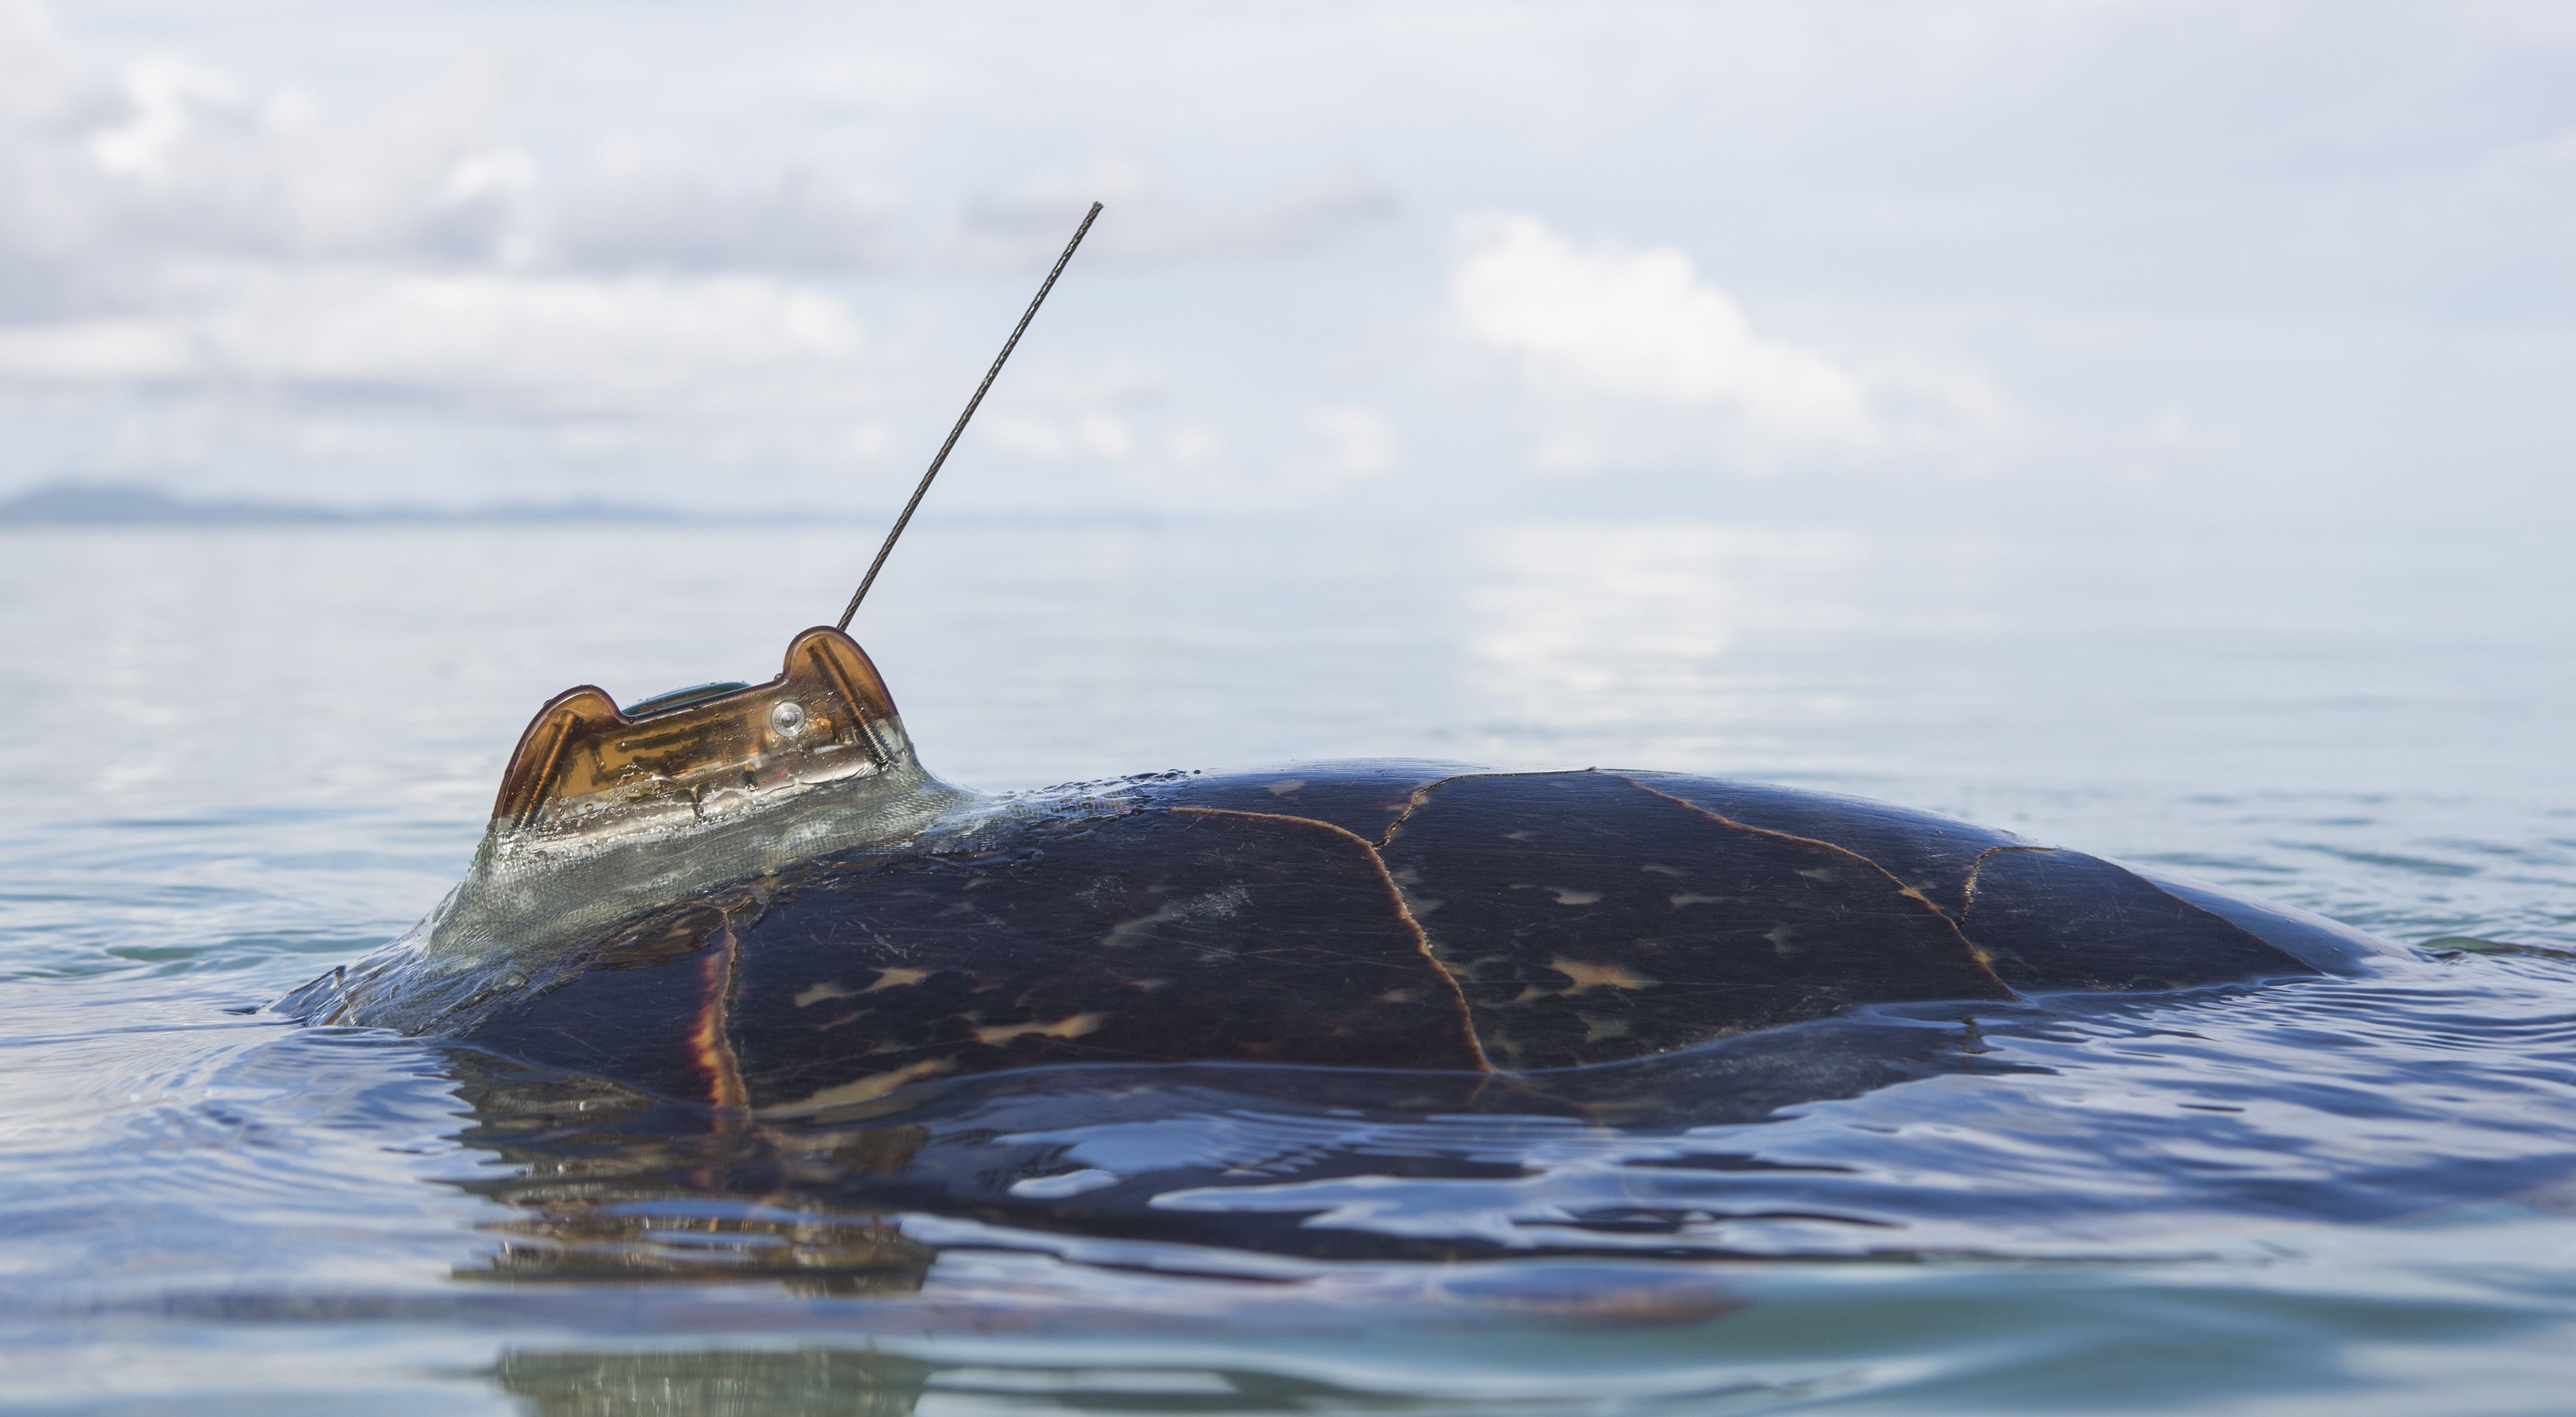 A turtle at the ocean's surface has a tracking device on its shell.